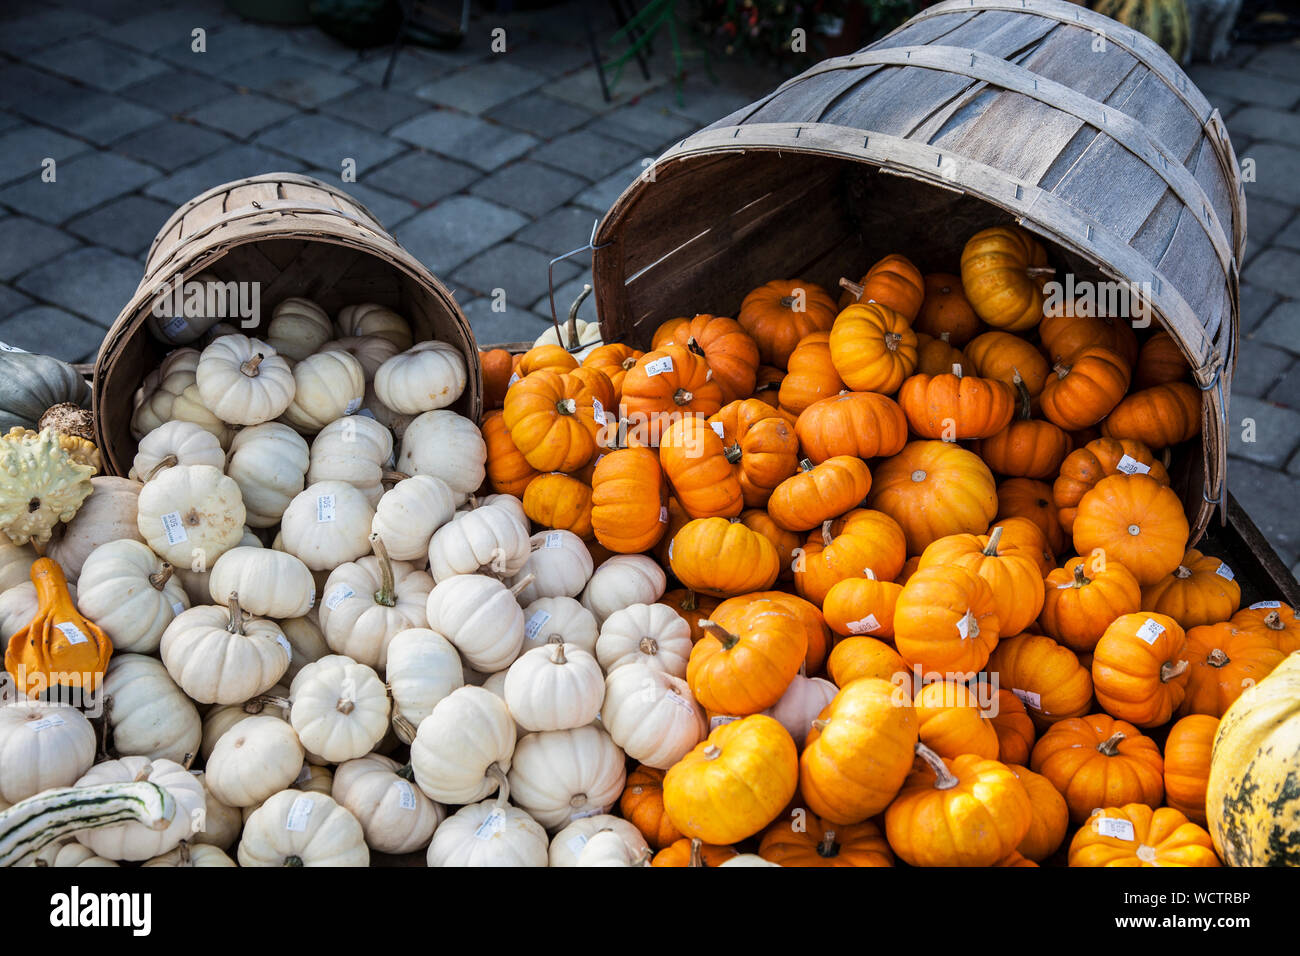 Mini pumpkins, Hooligans, spilling out of two baskets in Lancaster County, Pa, Pennsylvania, USa, container basket, hooligan, sweetie pie display Stock Photo